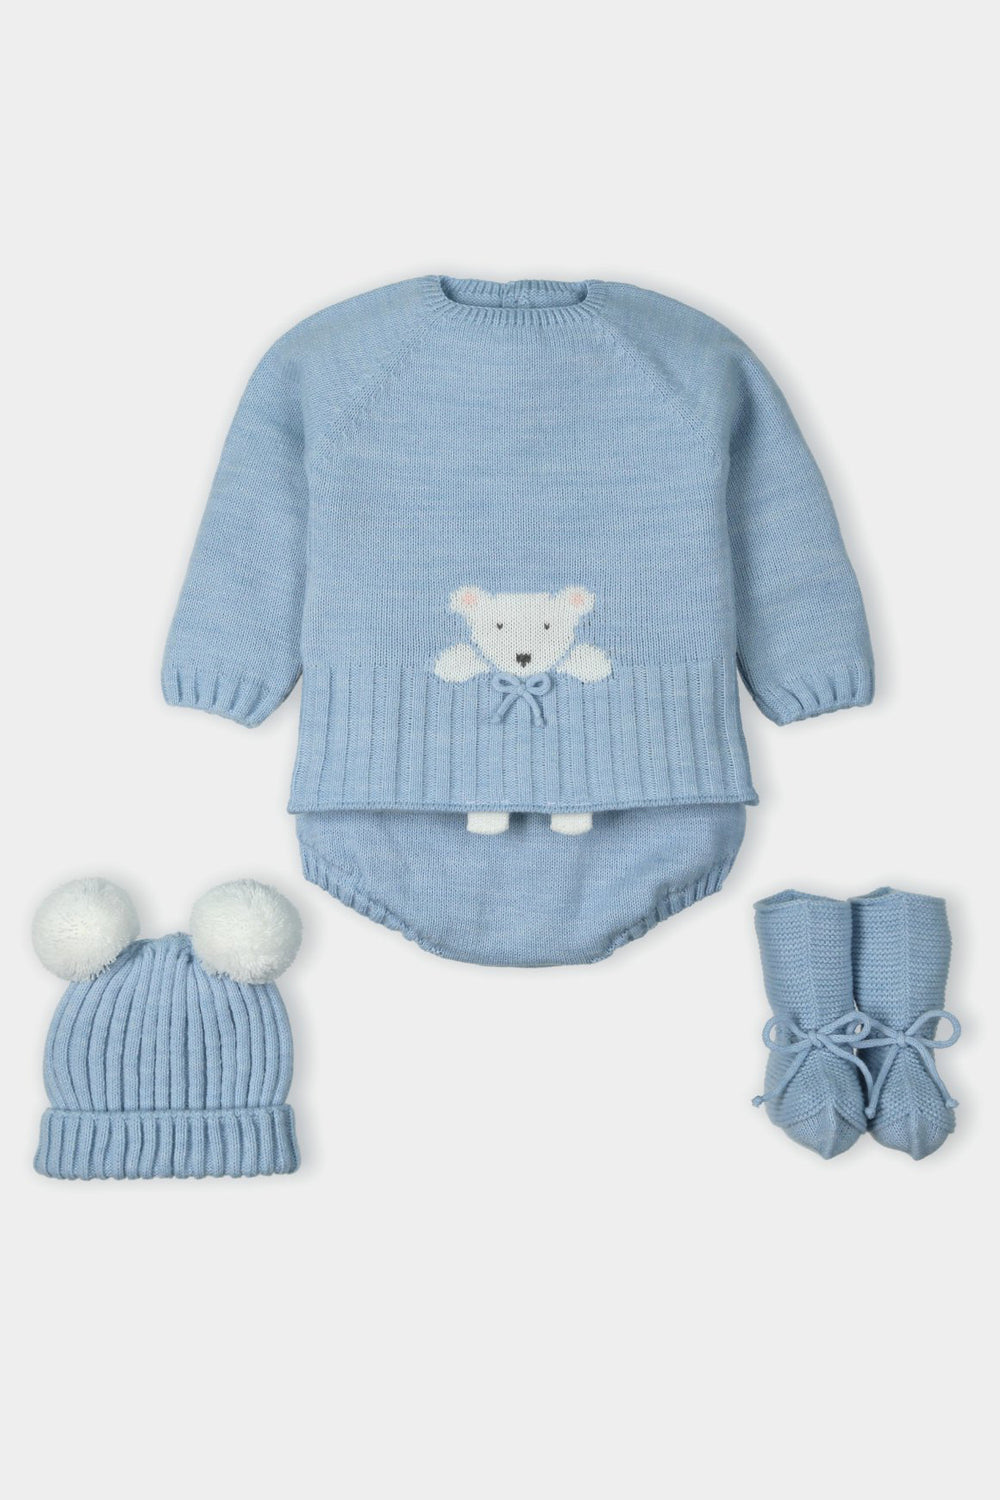 Mac Ilusión PREORDER "Cyril" Knitted Teddy Outfit Set | Millie and John